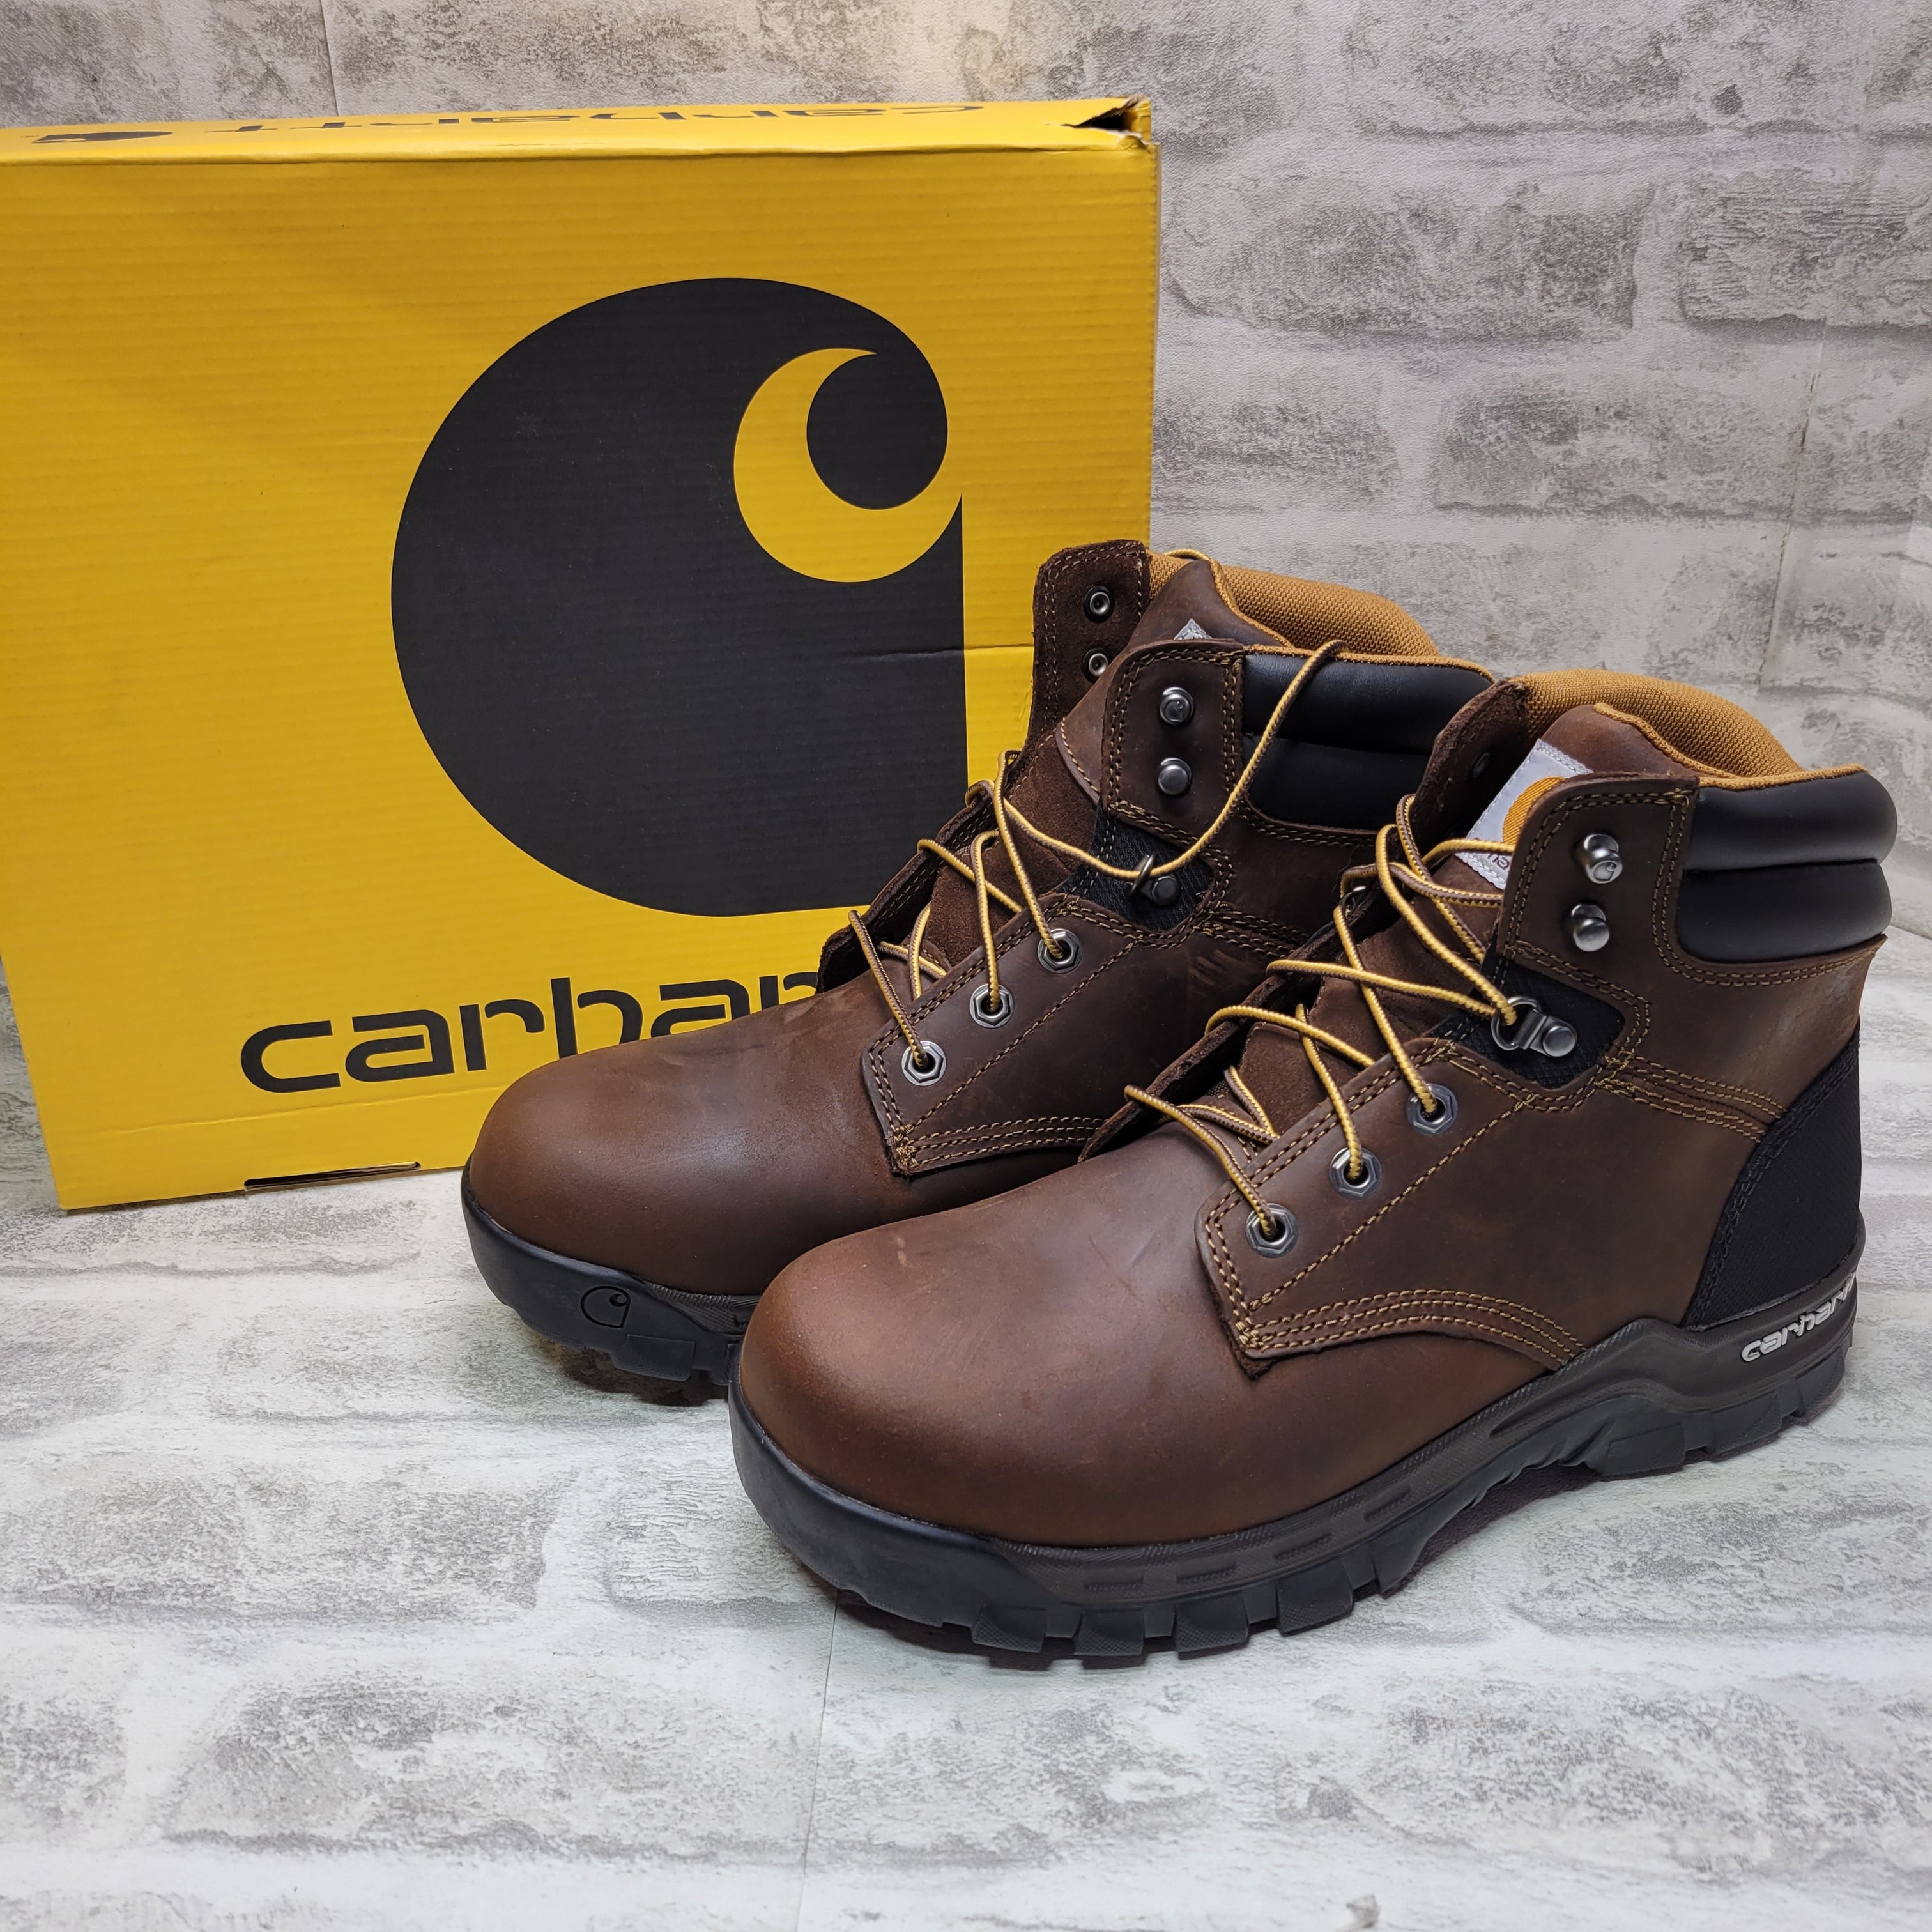 Carhartt Men's CMF6066 6 Inch Soft Toe Boot (10.5, Brown Oil Tanned Leather) (7774445371630)